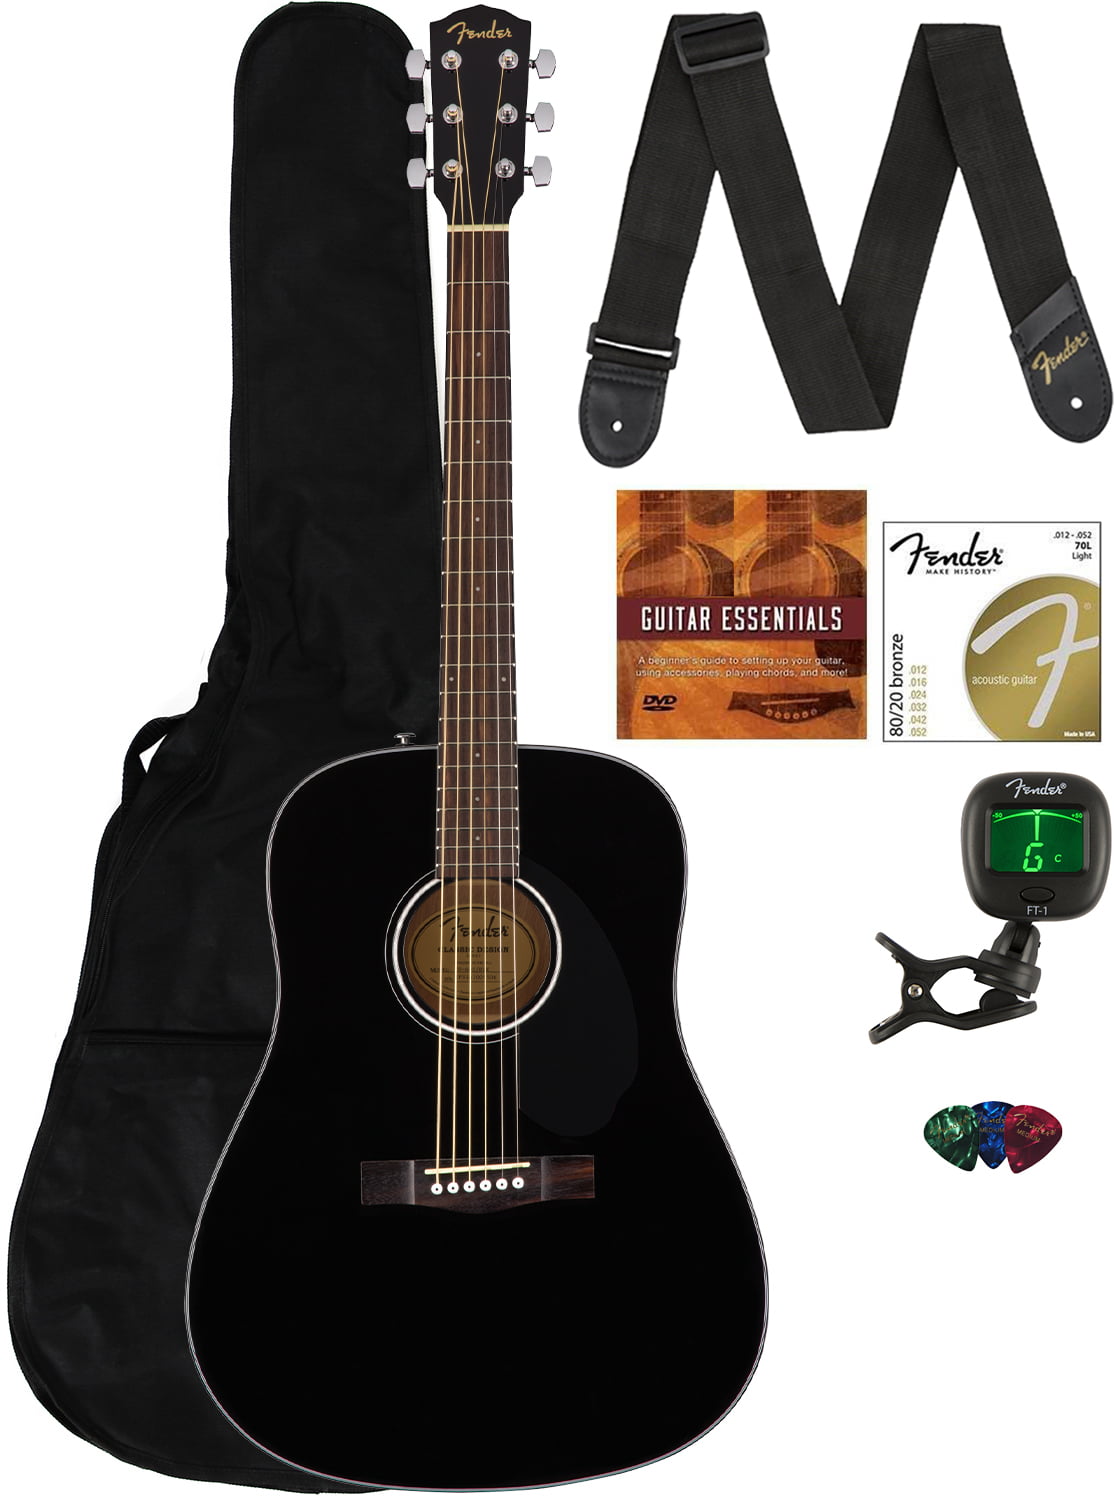 Foot Rest Sunburst Bundle with Tuner Fender Squier Classical Acoustic Guitar Austin Bazaar Instructional DVD and Polishing Cloth Strings